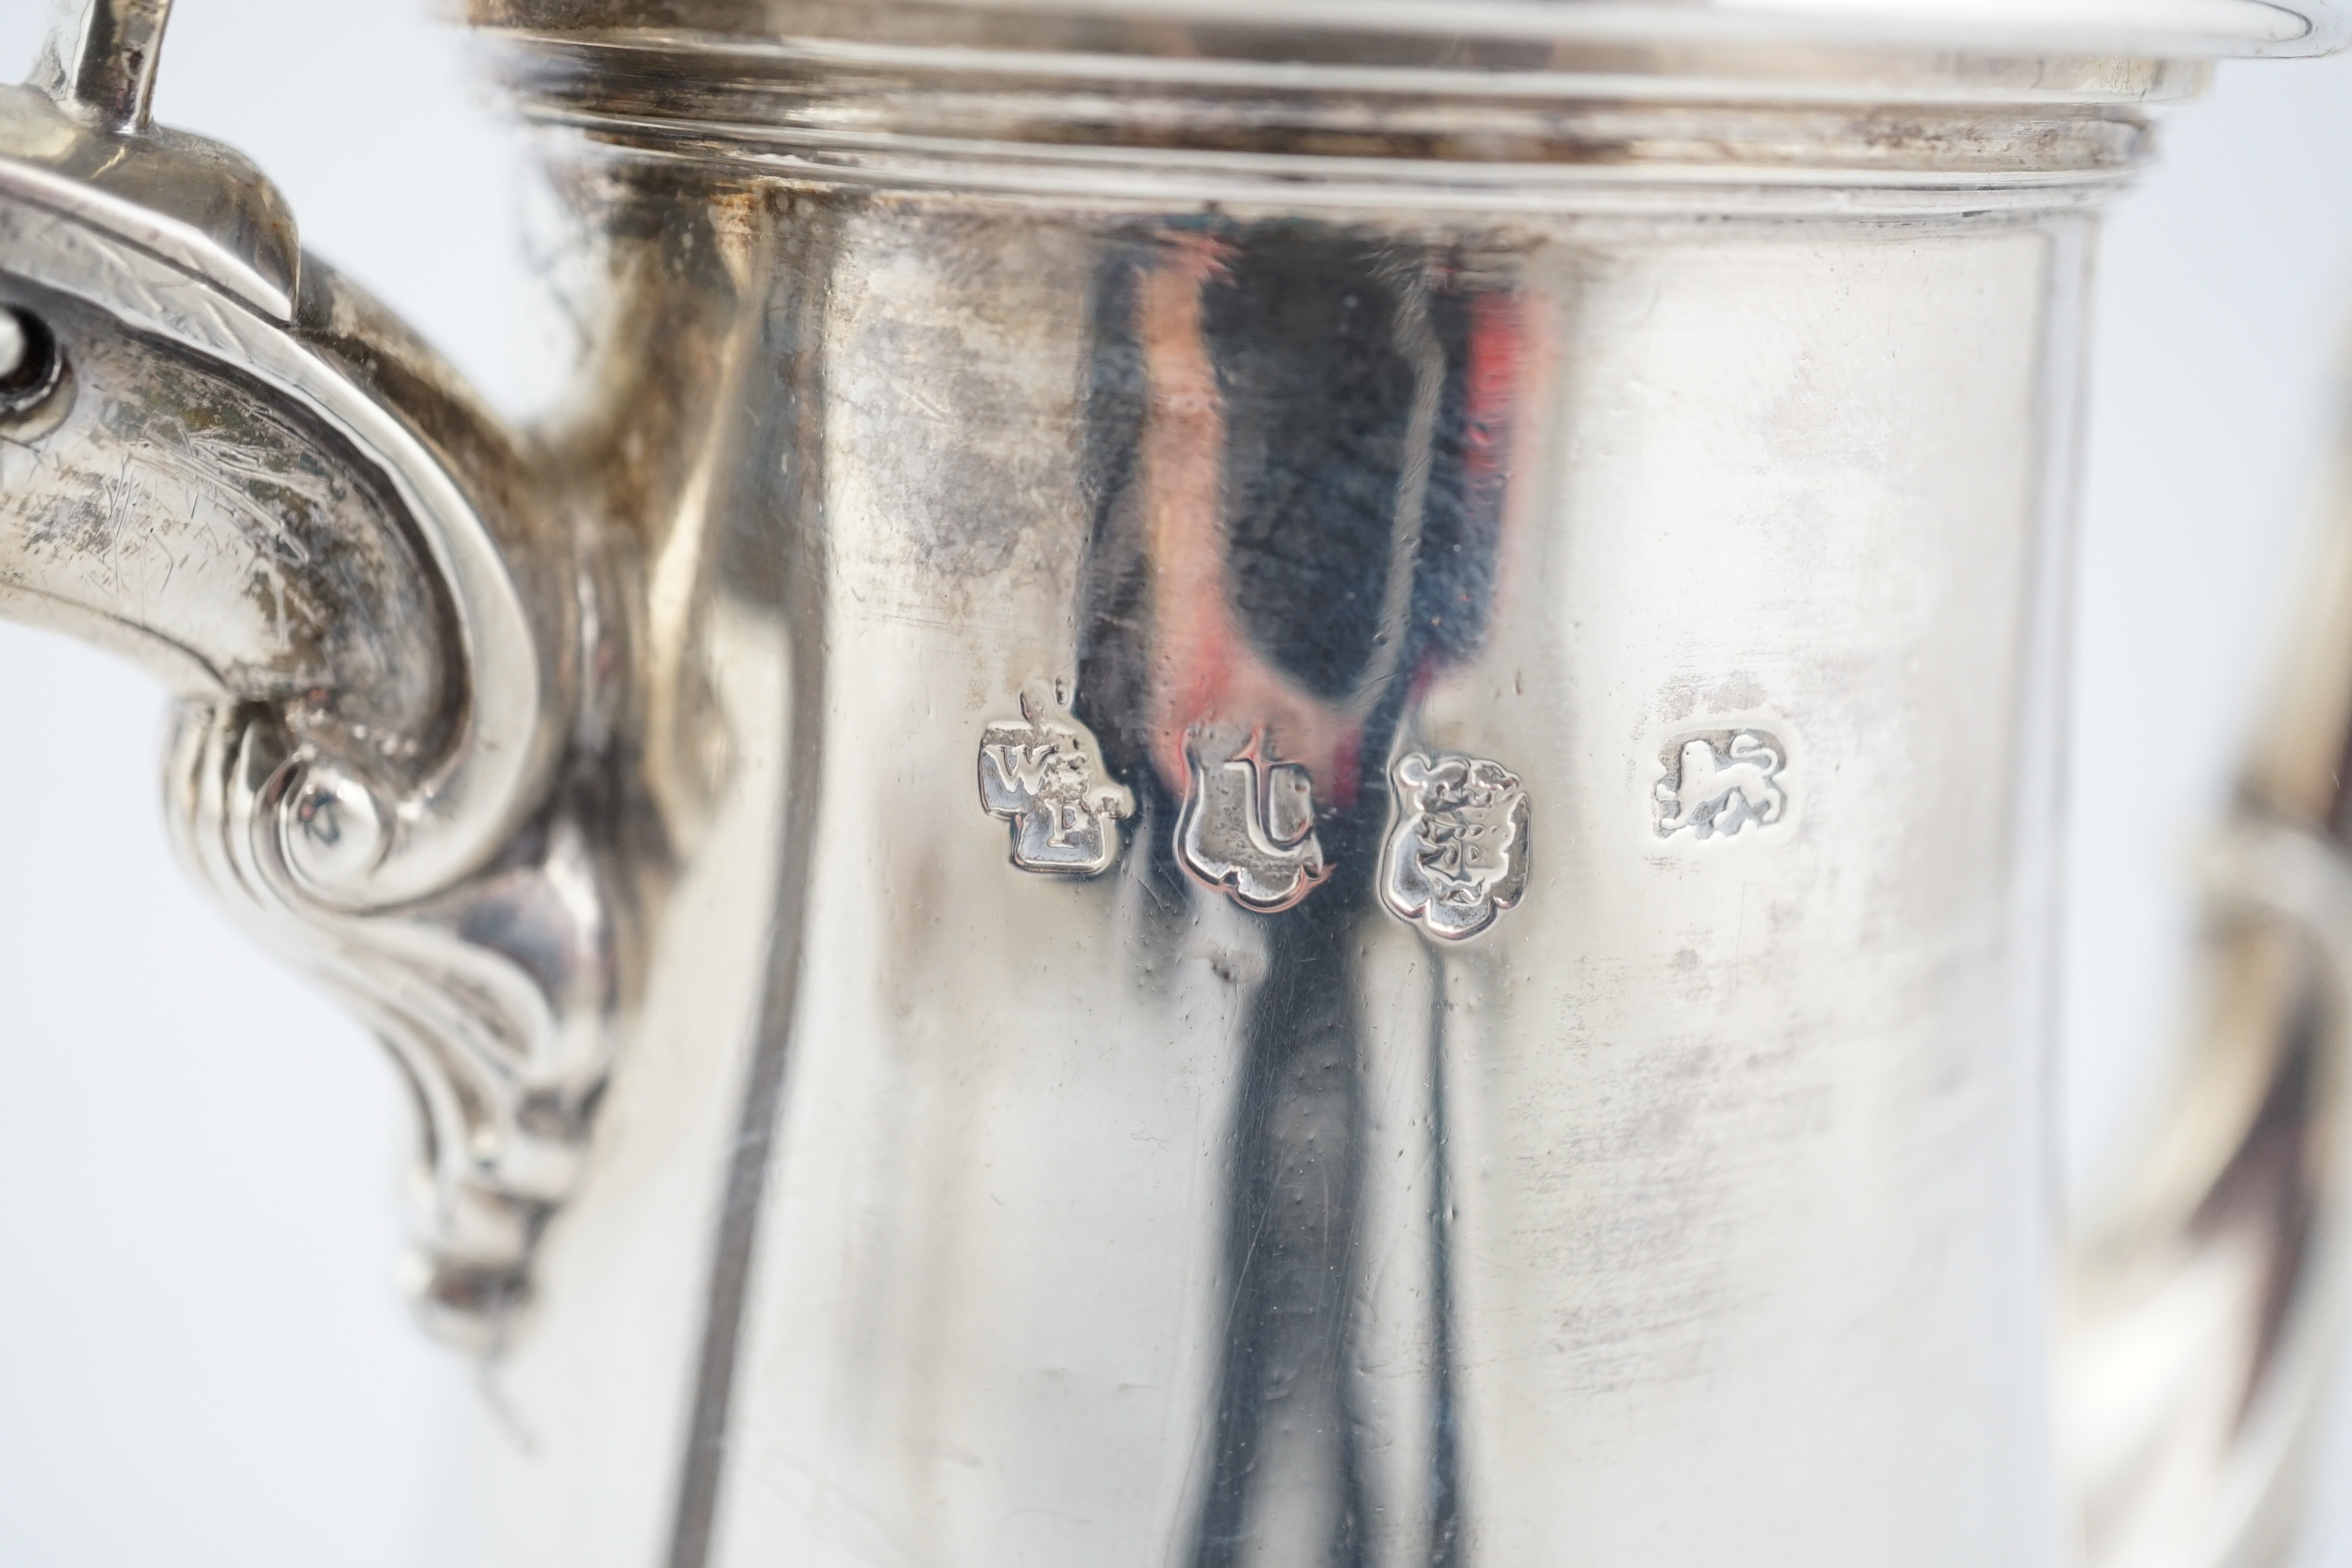 A George II silver coffee pot, possibly by William & Robert Peaston